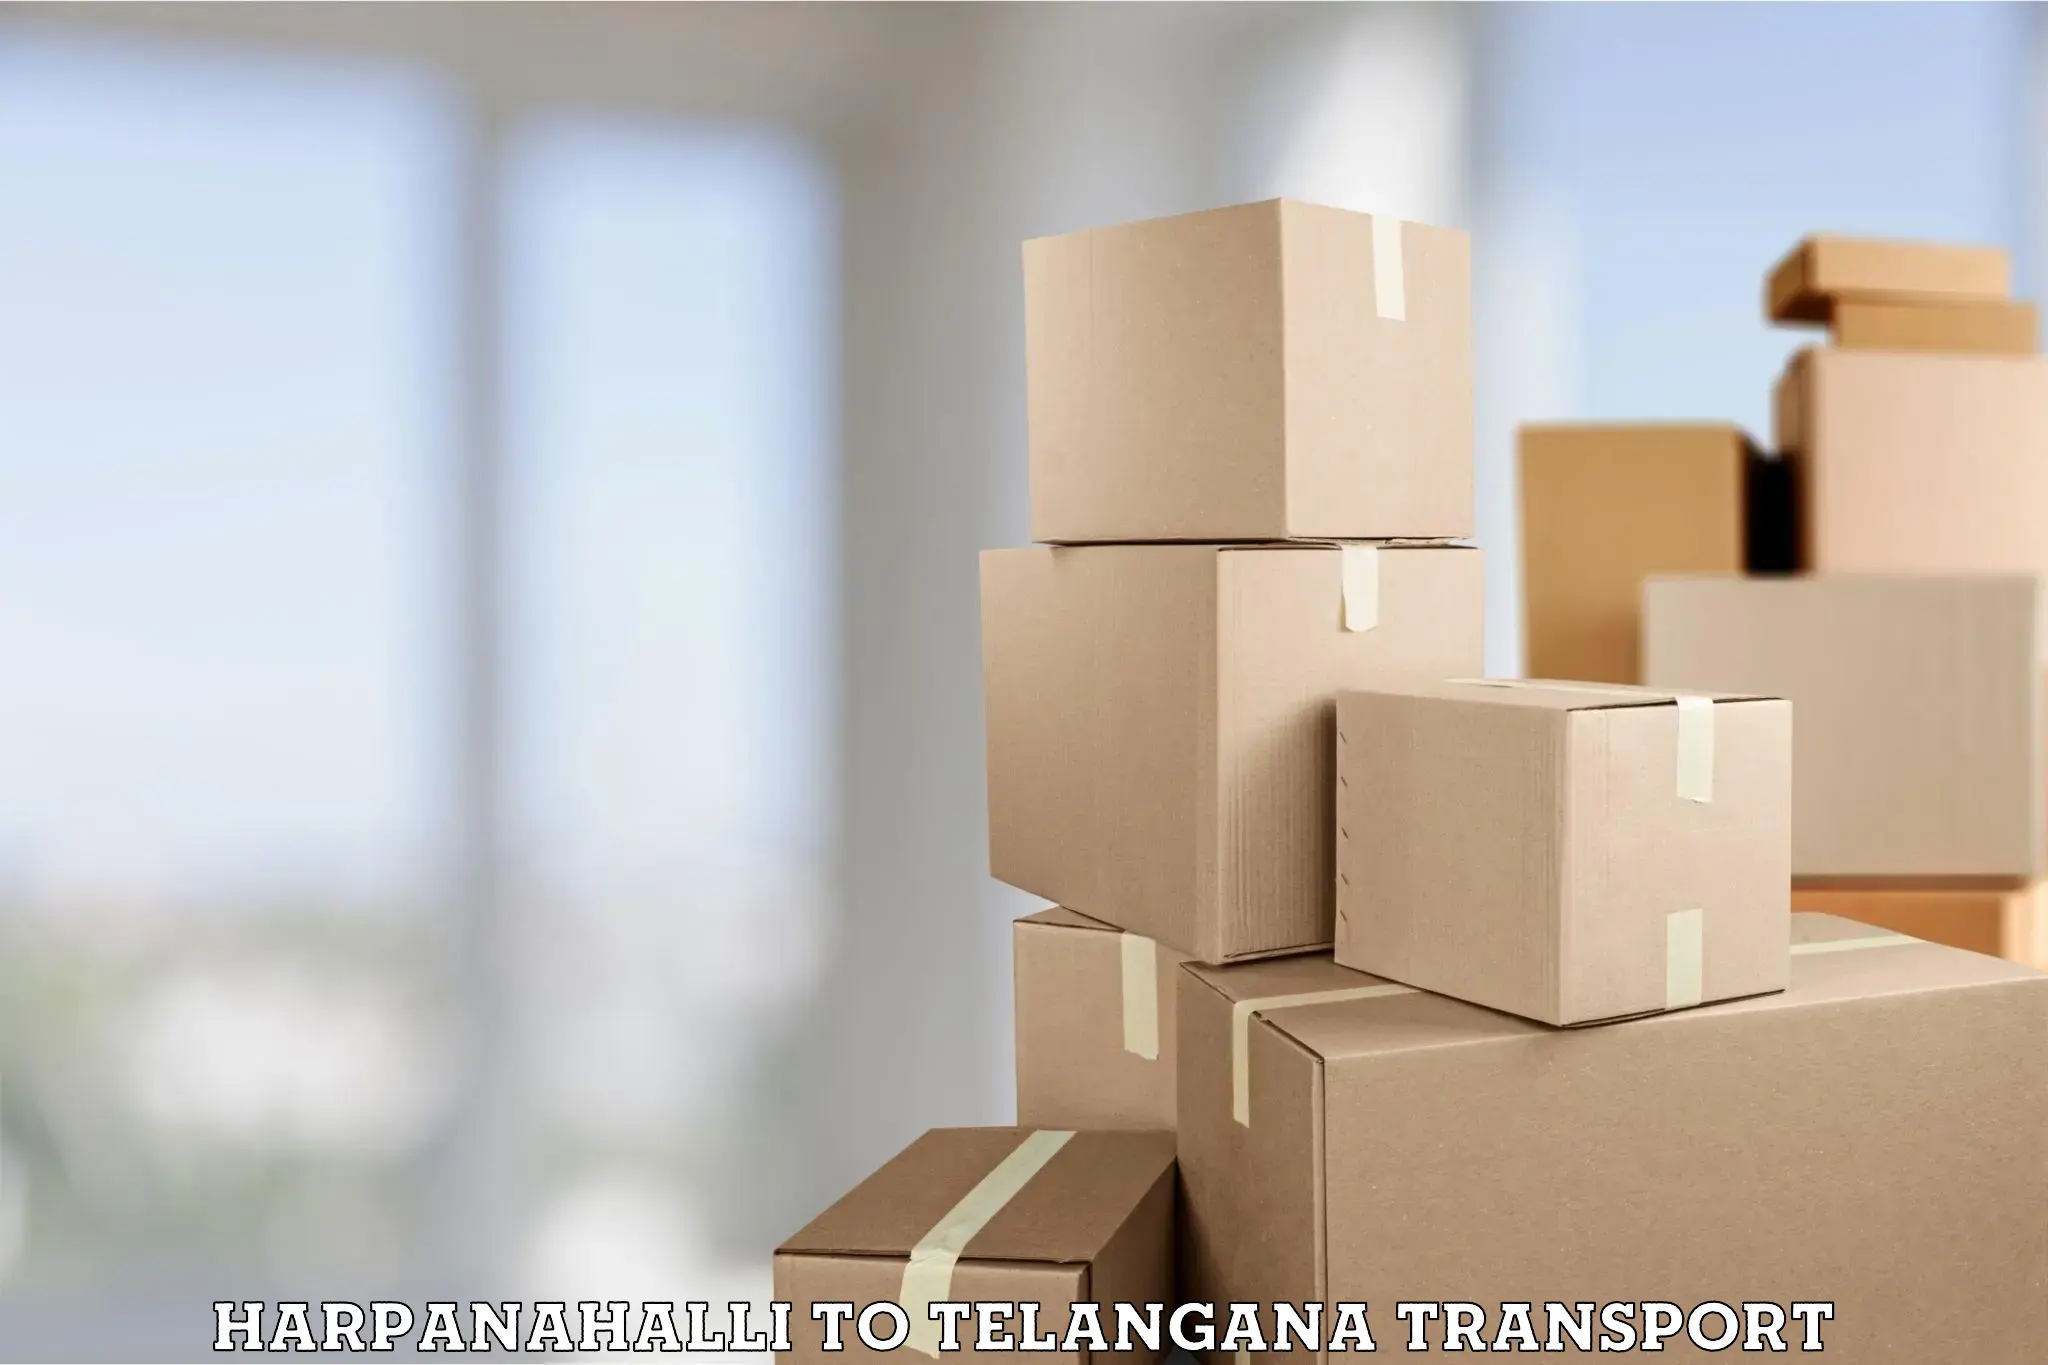 Commercial transport service Harpanahalli to Sangareddy